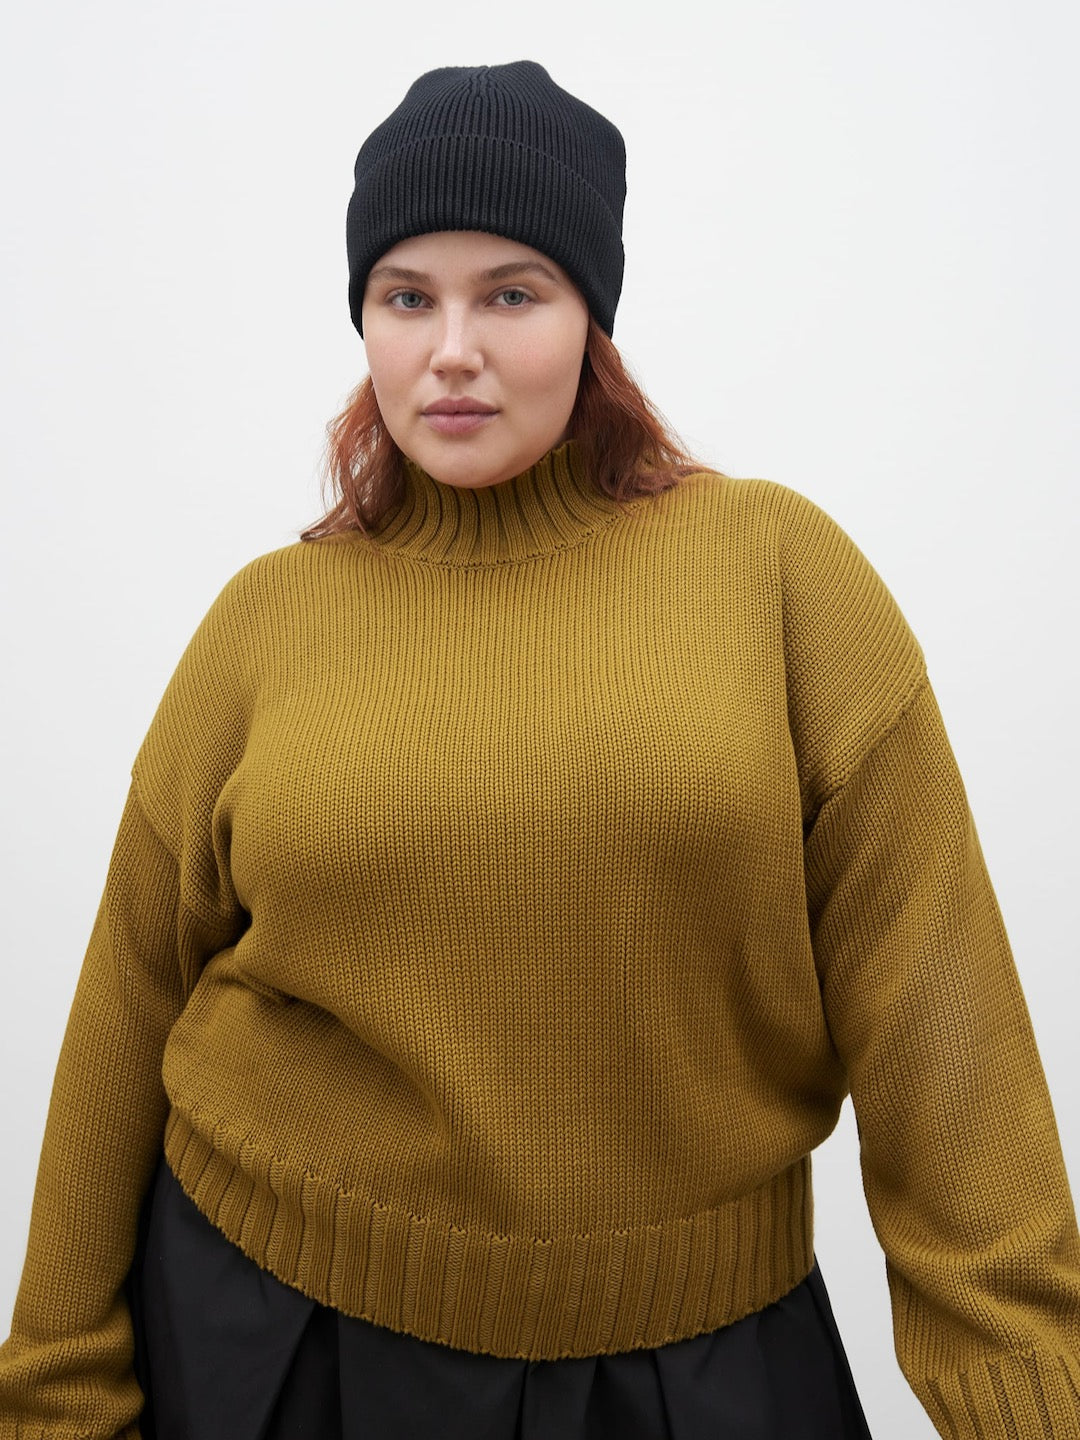 A model wearing a Staple Sweater – Chartreuse by Kowtow and black beanie.